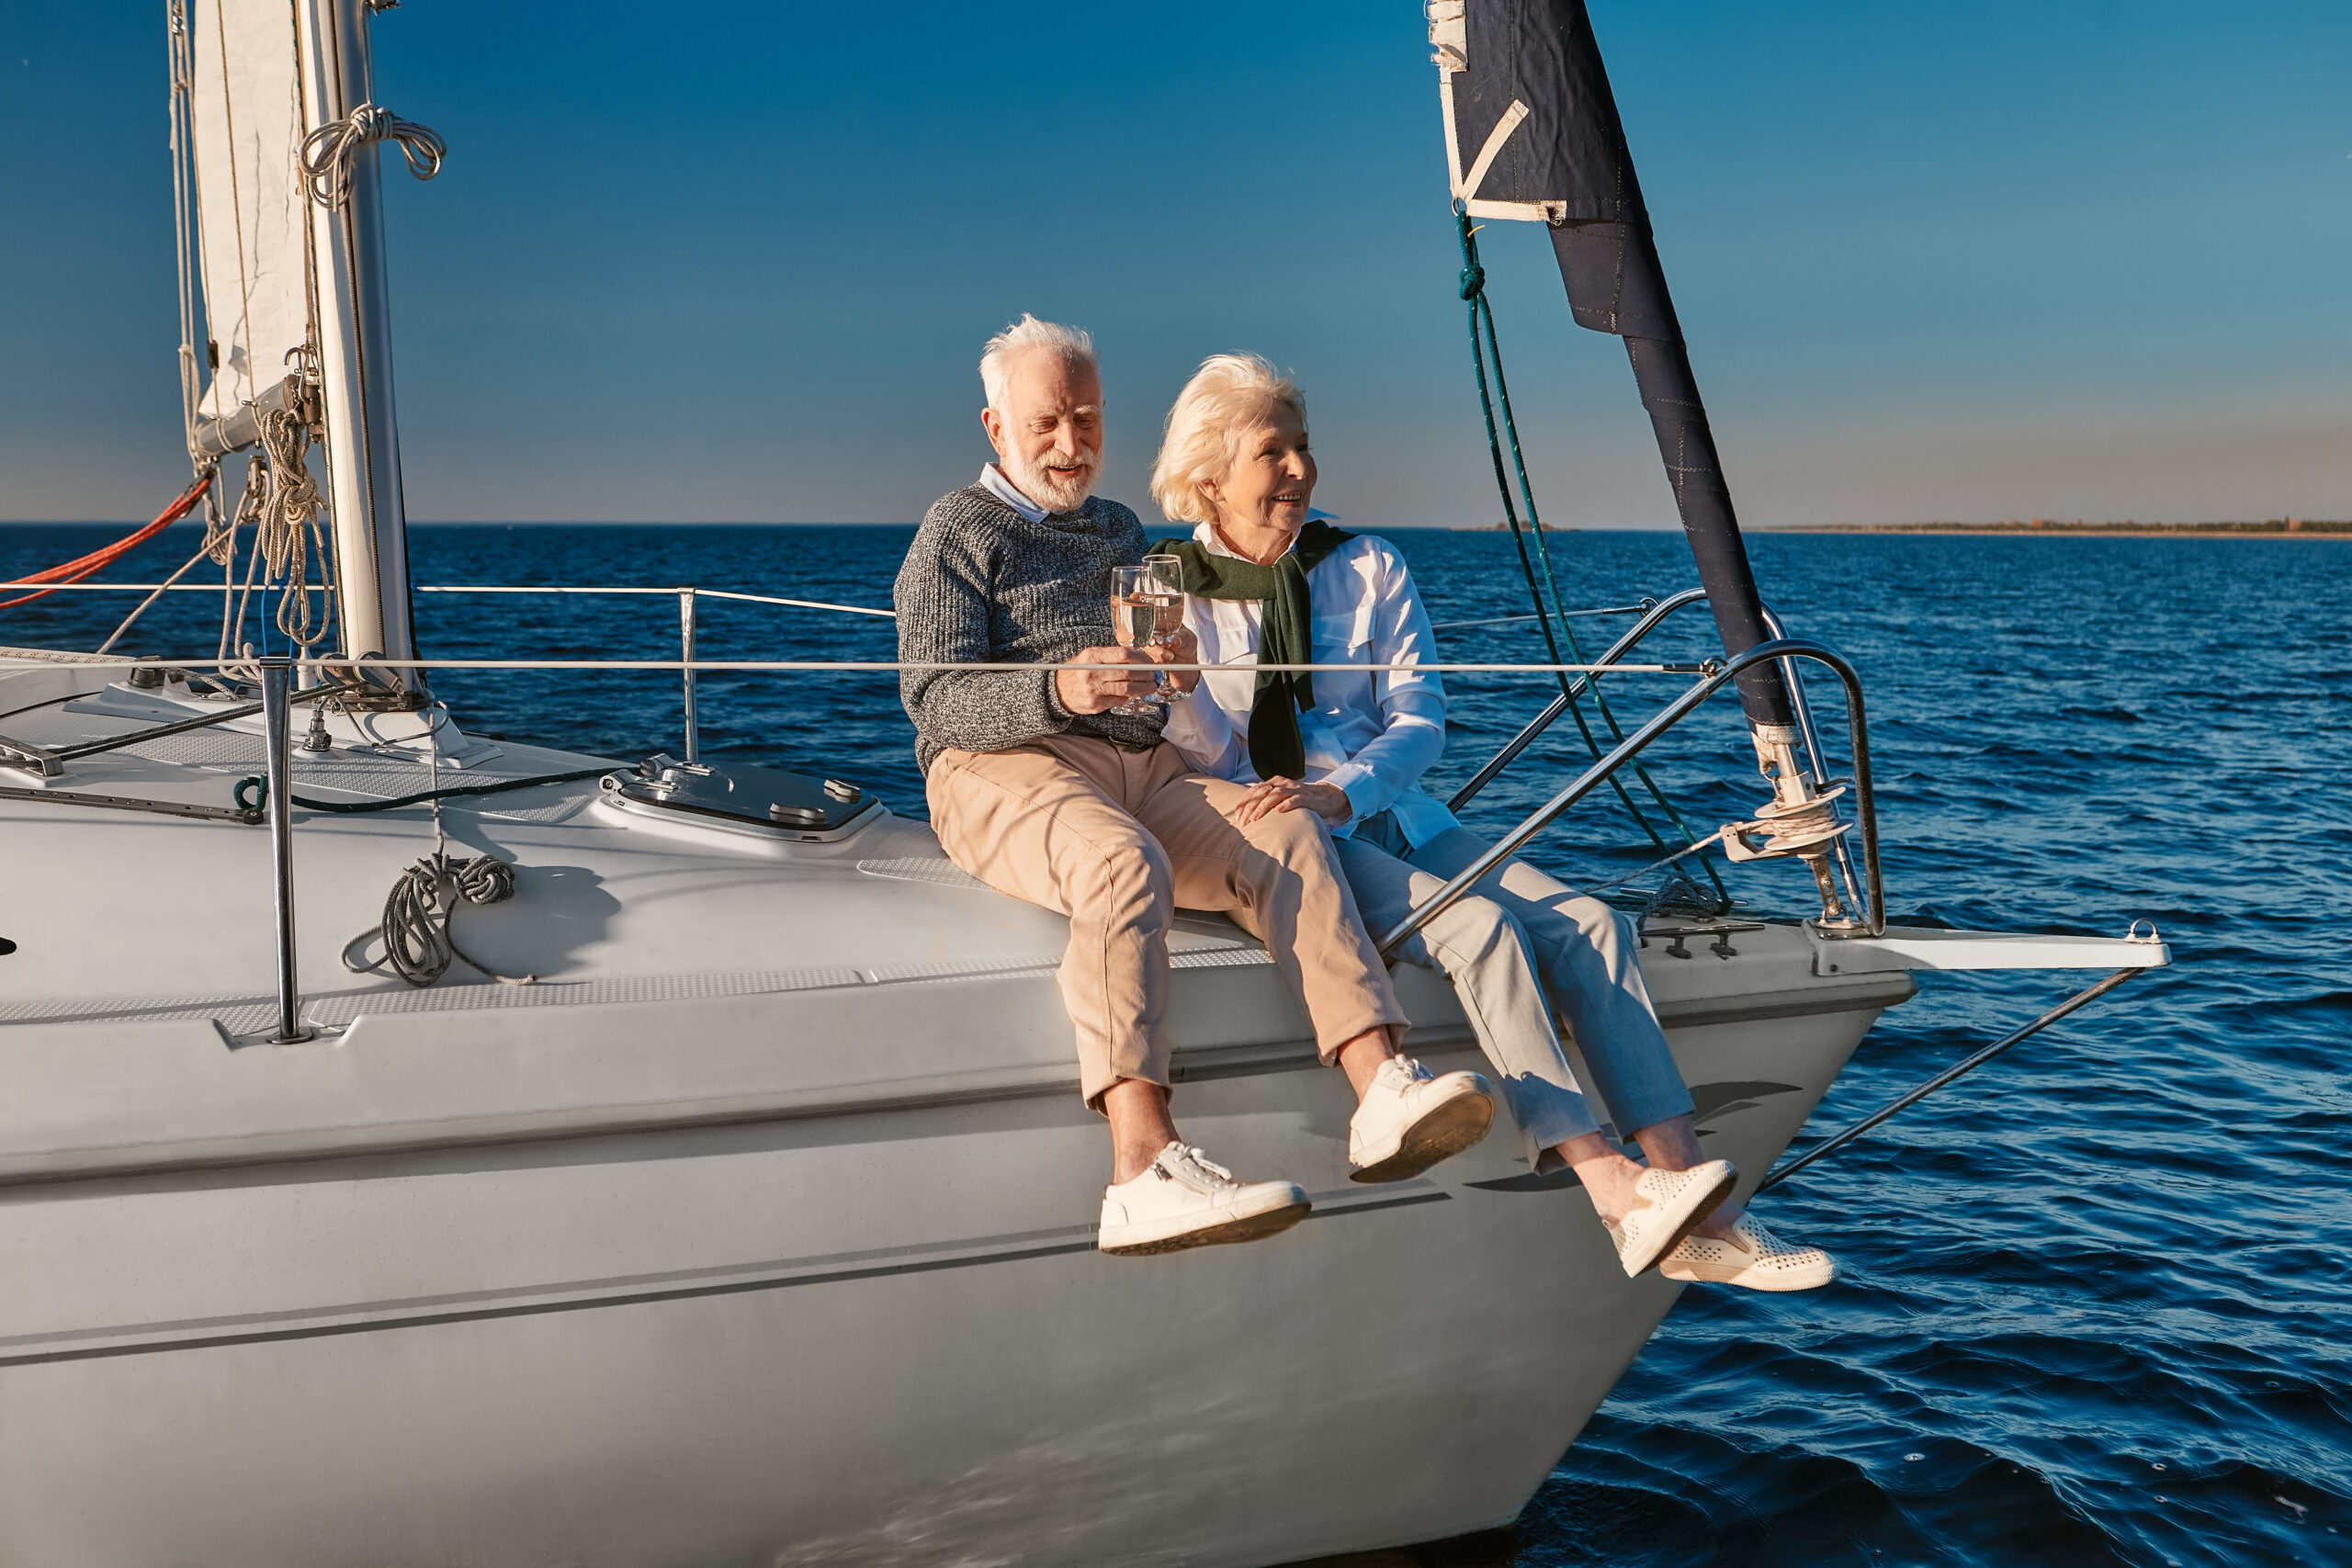 Senior couple sitting on the bow of a sailboat, enjoying a glass of wine together on the open sea.